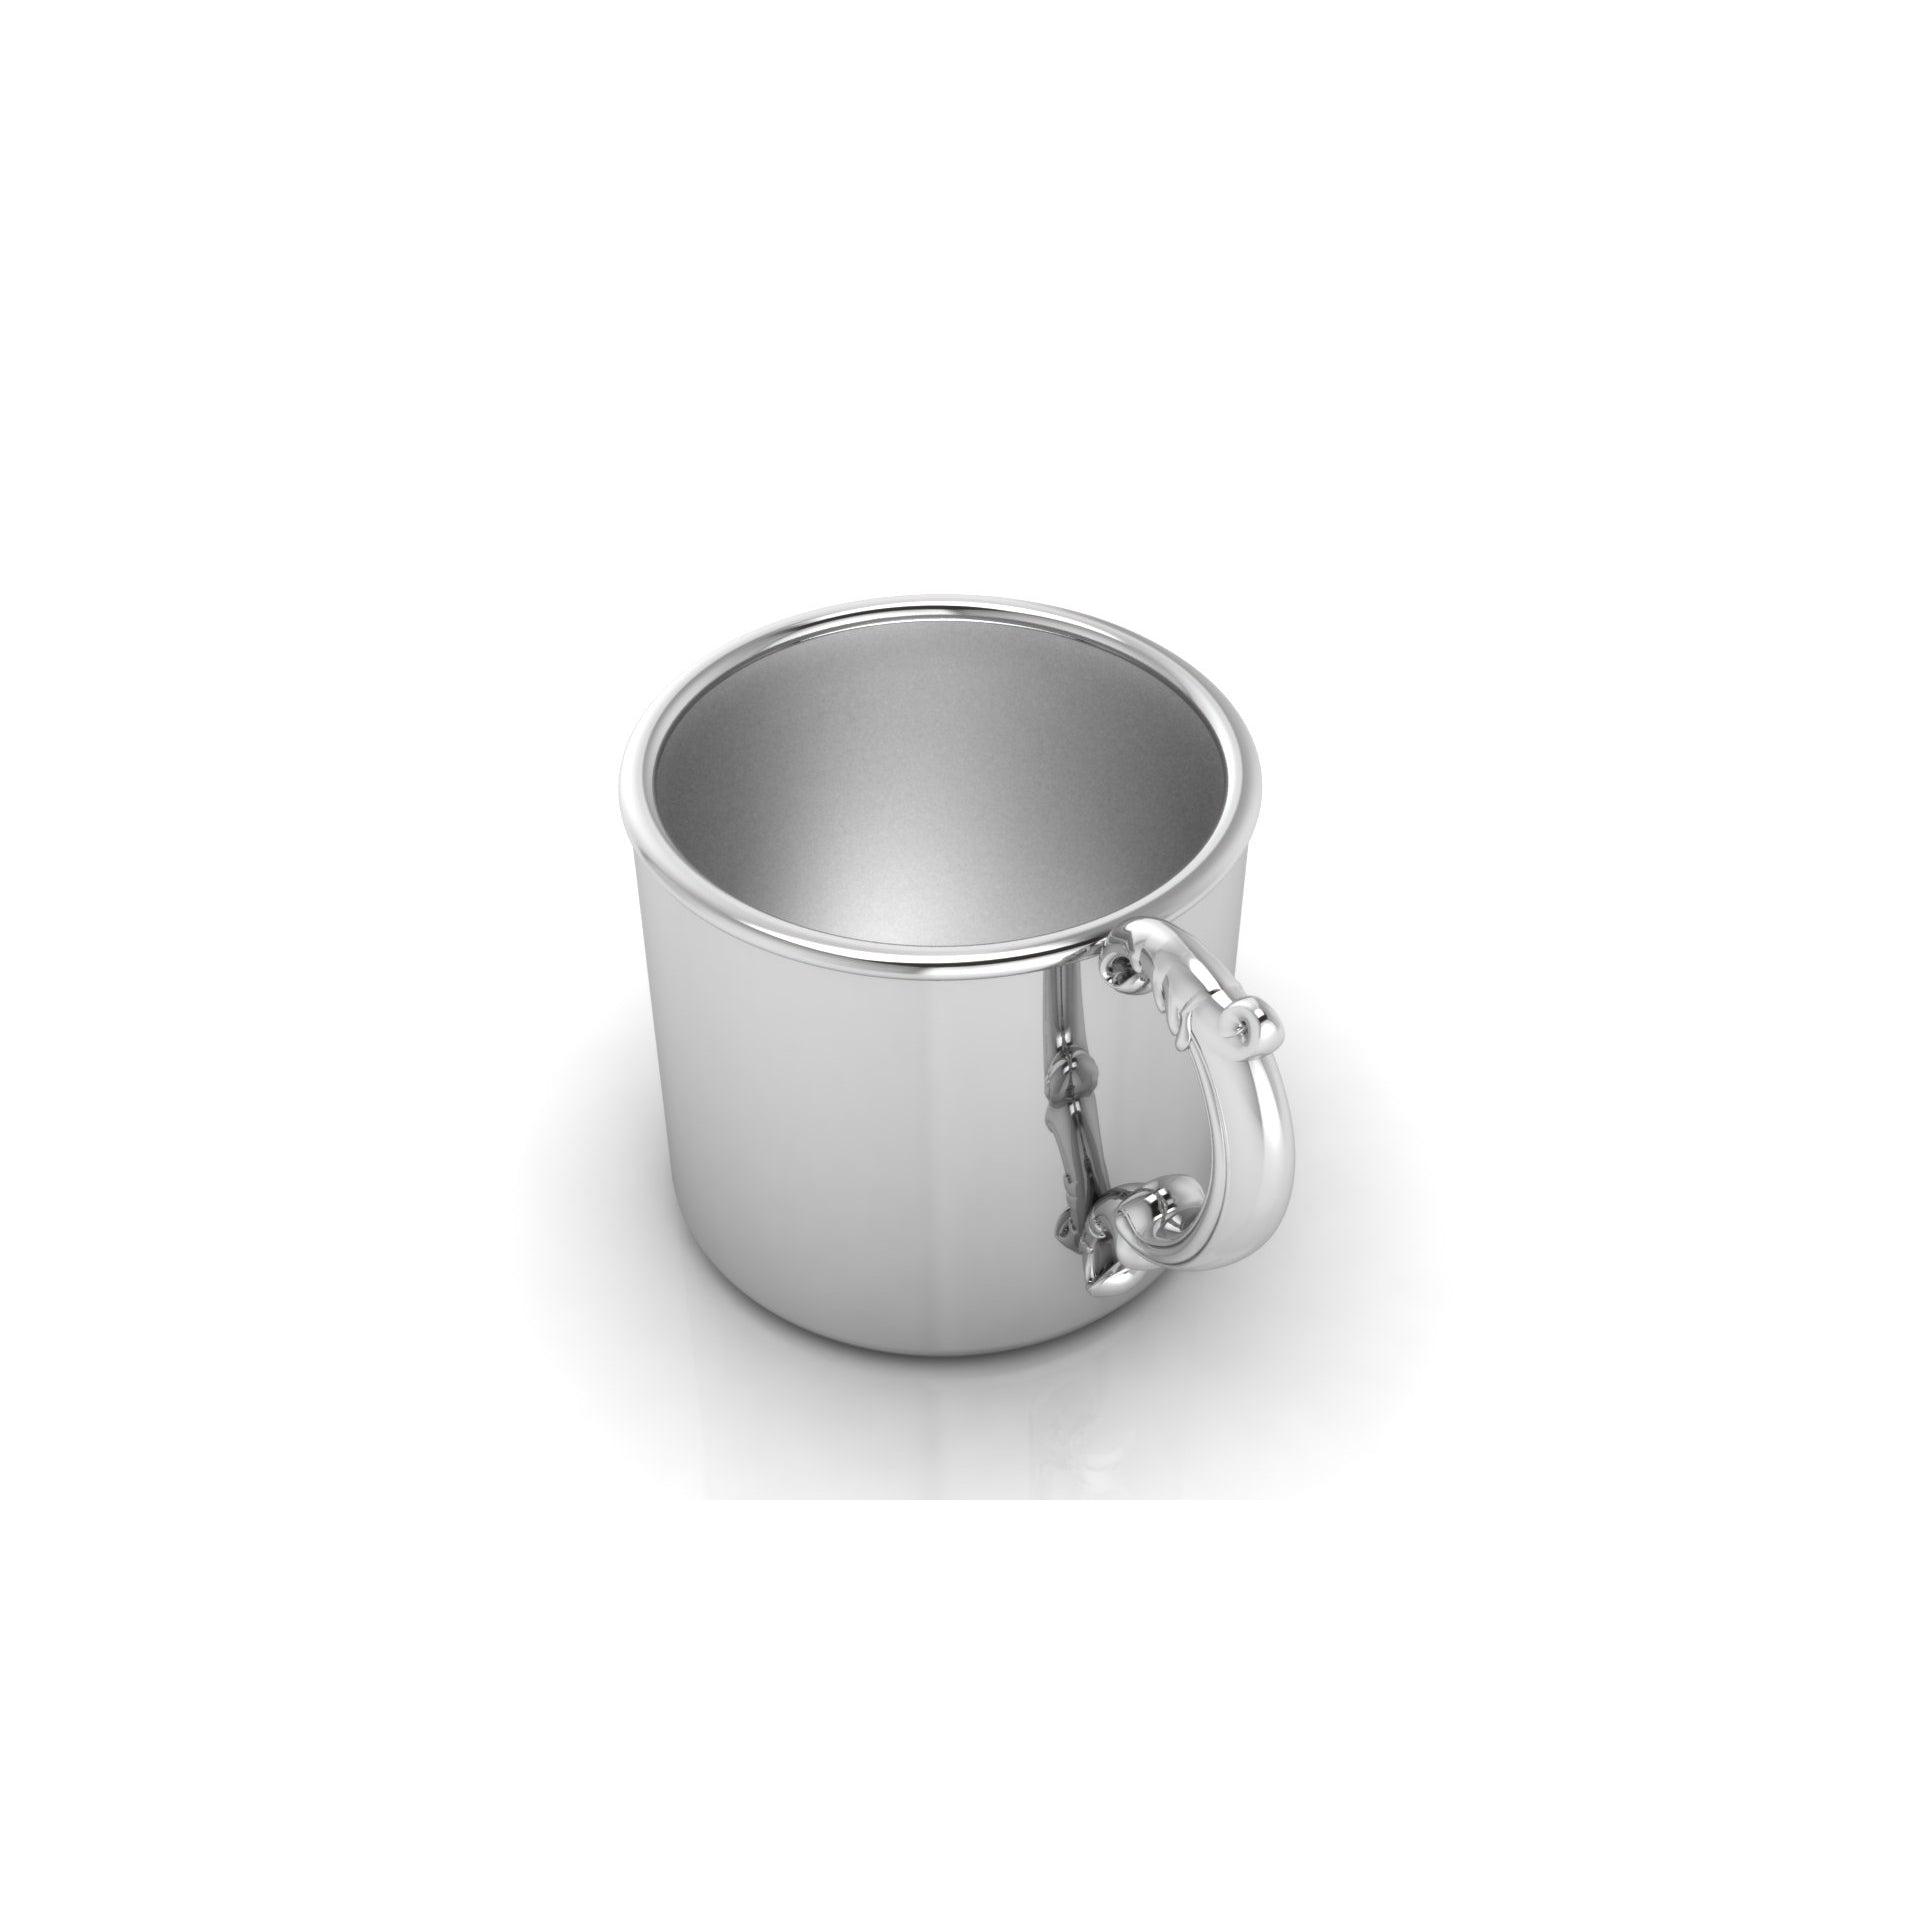 Sterling Silver Cup - Classic Cup with a Victorian Handle